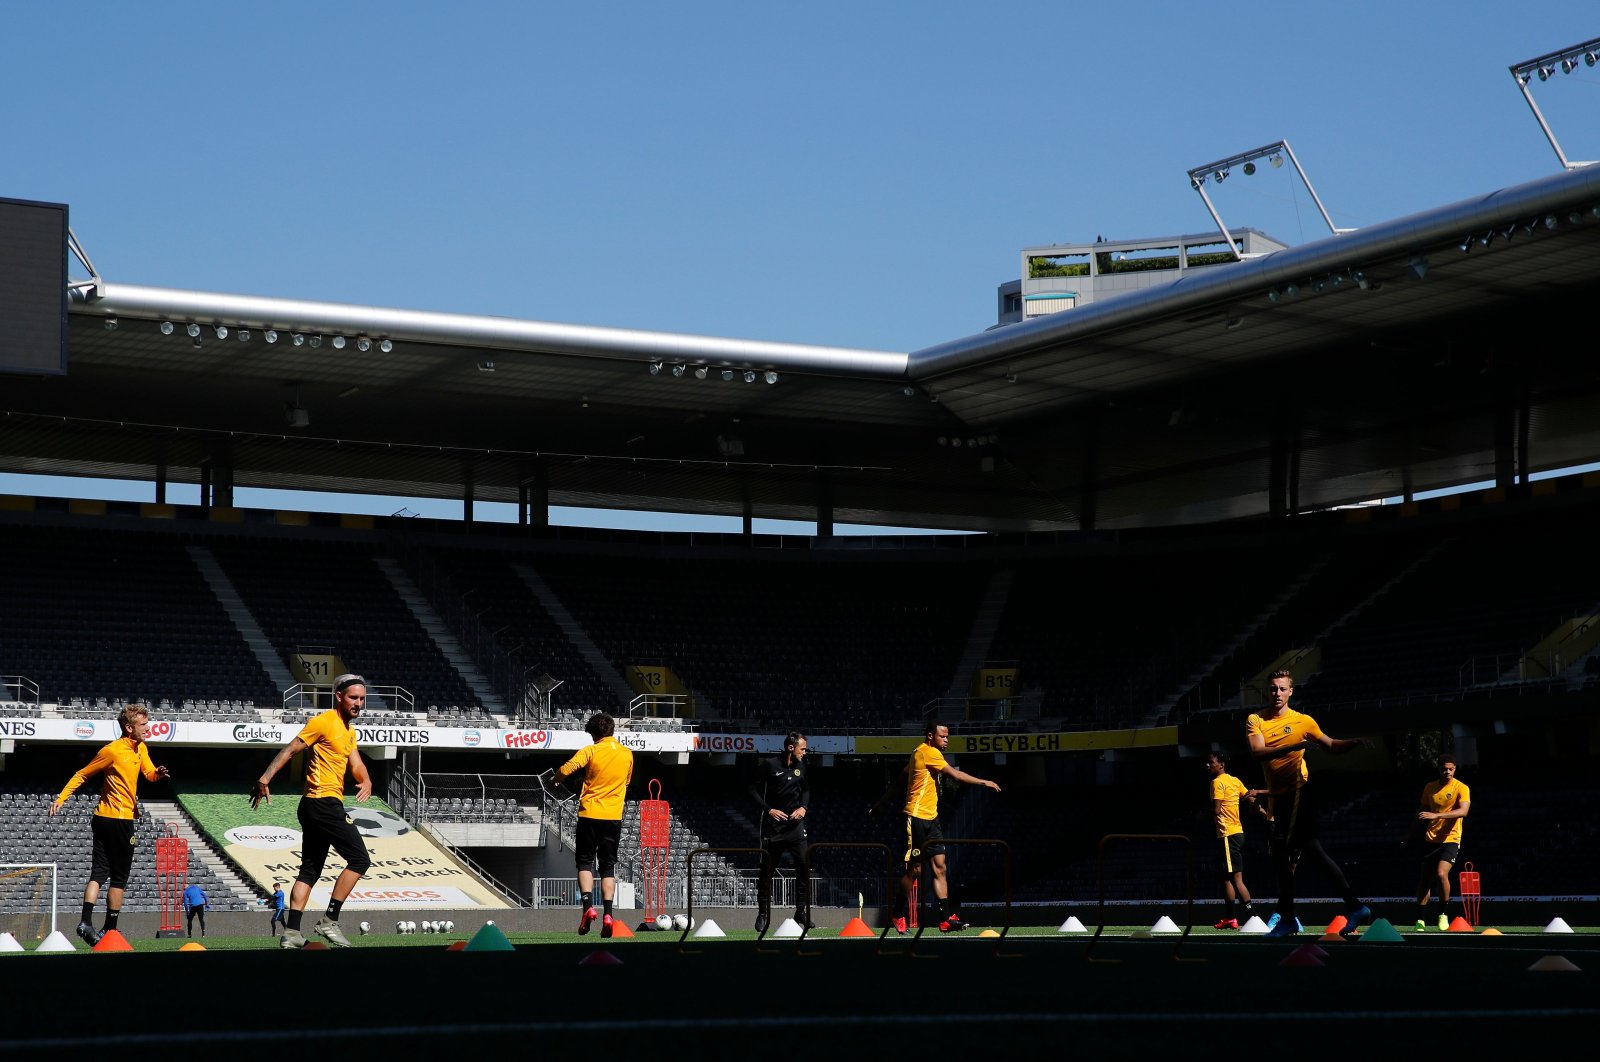 BSC Young Boys' players attend the first training football session following an easing of lockdown rules in Switzerland during the COVID-19 pandemic at the Stade de Suisse stadium in Bern, Switzerland on May 18, 2020. (AFP Photo)